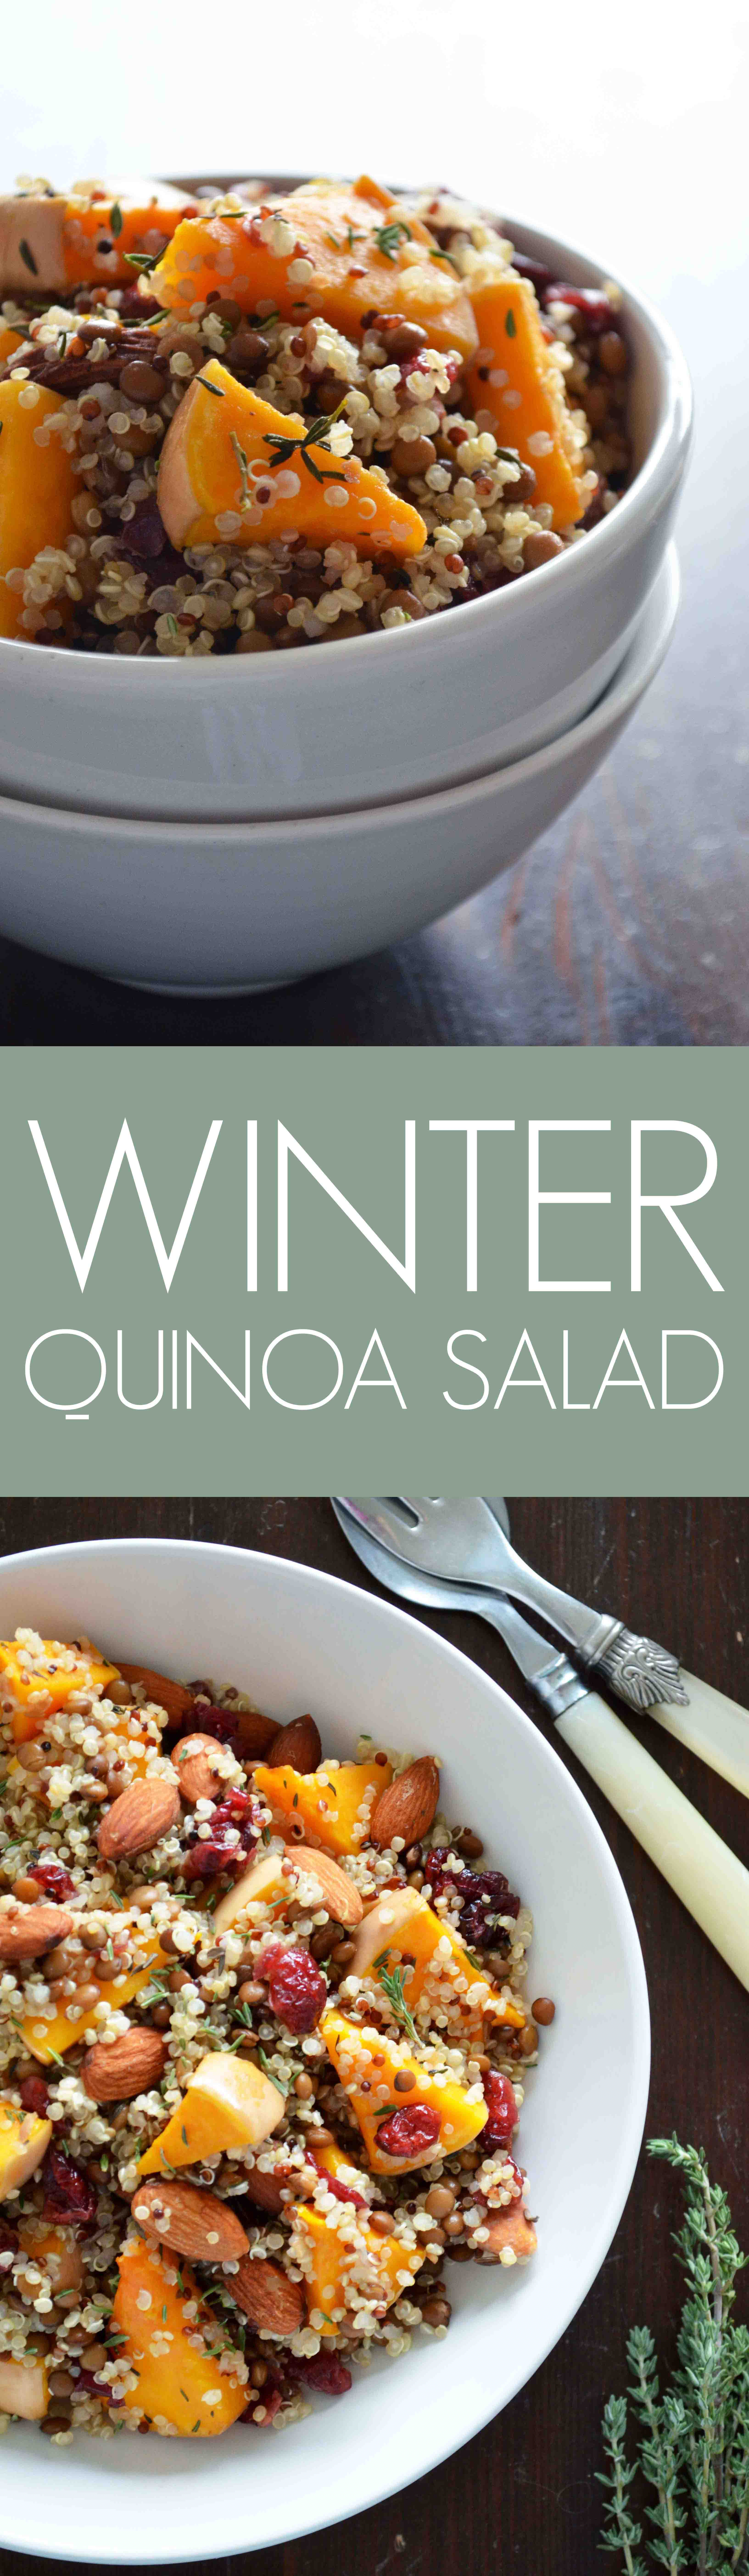 Recipe for Winter Quinoa Salad with thyme roasted butternut squash, almonds, quinoa, lentils, cranberries and a tangy orange vinaigrette. It is basically heaven in a bowl! {vegan, gluten free, paleo}